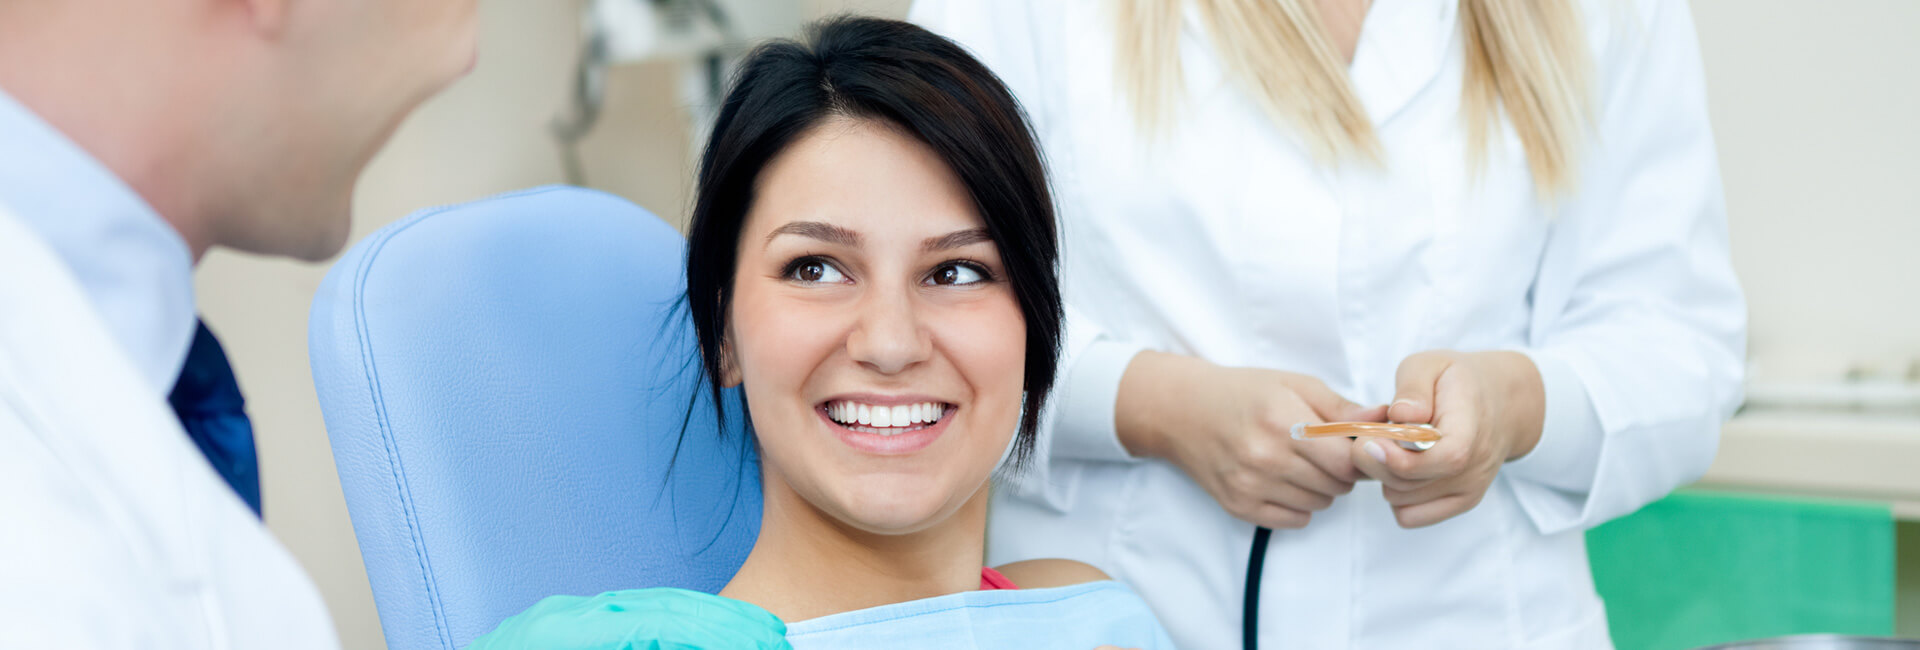 Woman smiling showing her bright white teeth at dental clinic